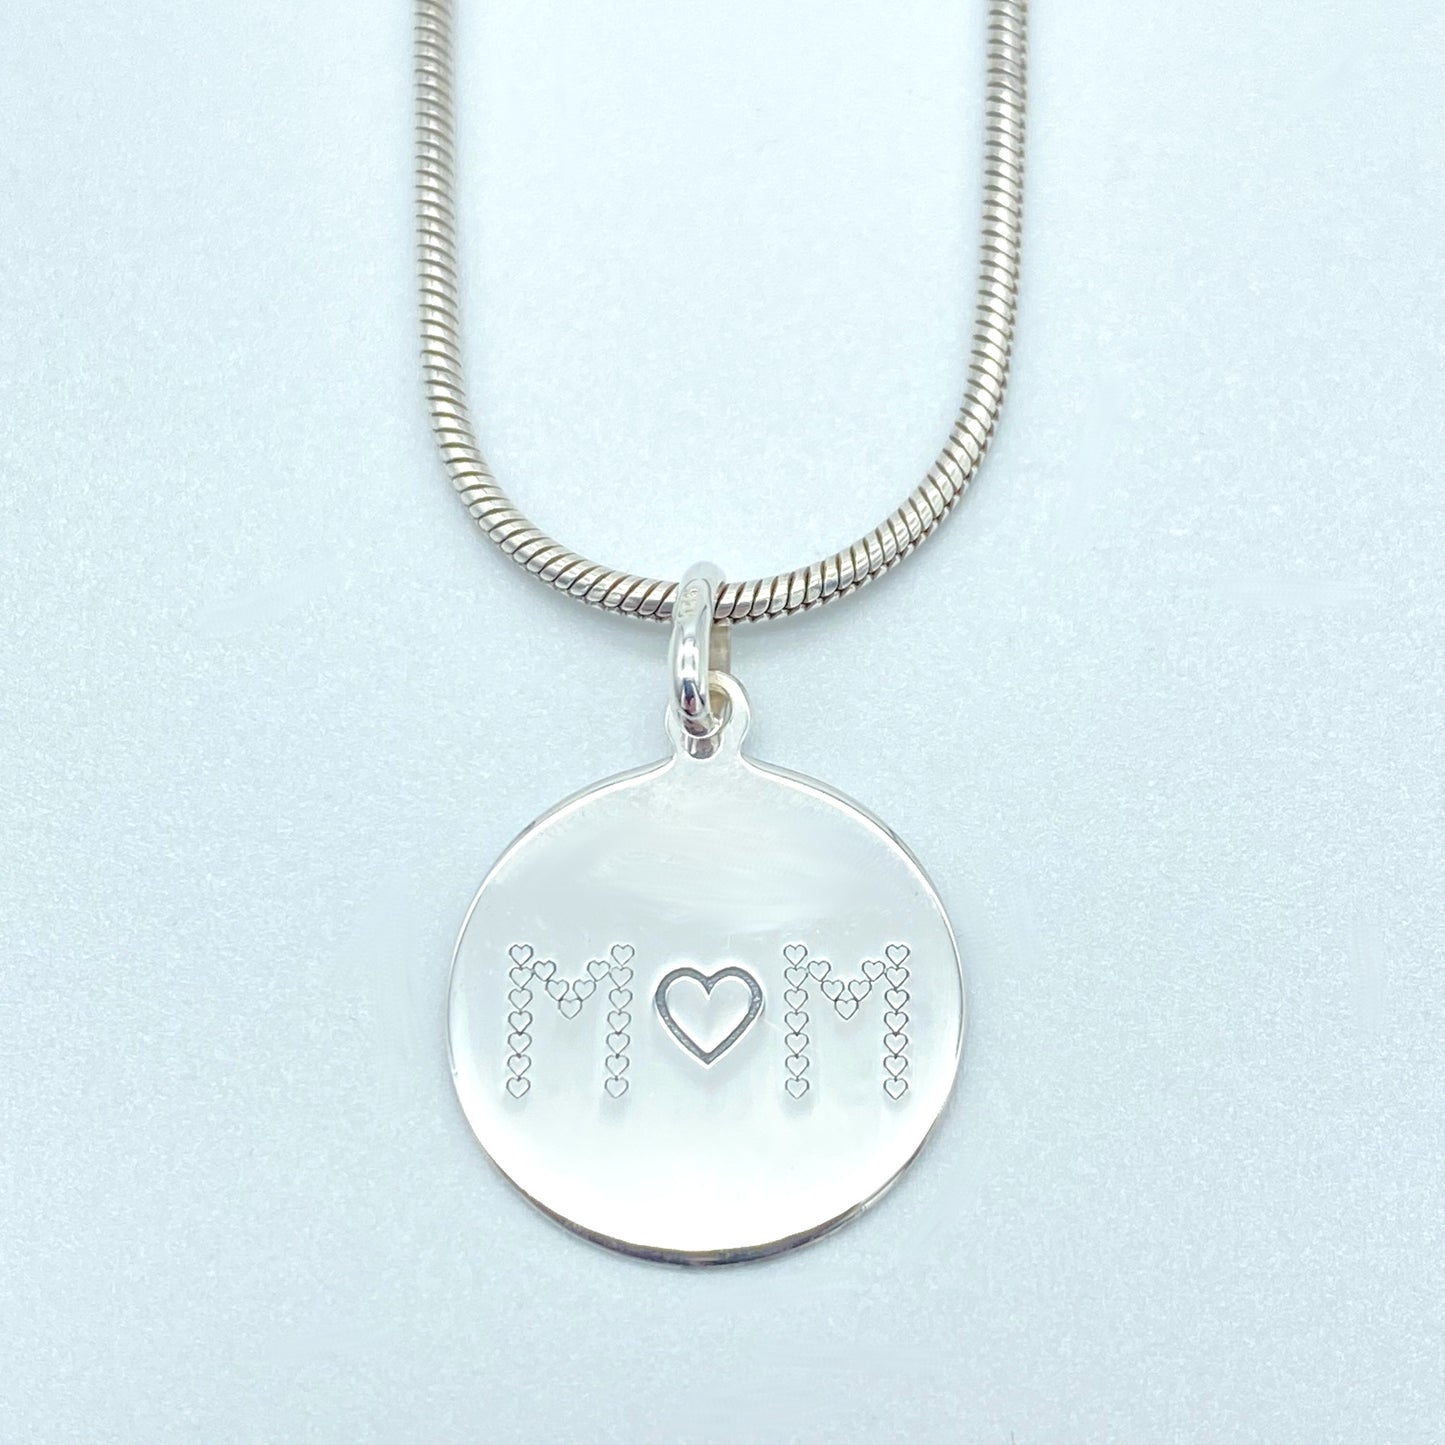 Rear of Sterling Silver Necklace with "A Mother's Love is Like No Other" Pendant by My Silver Wish